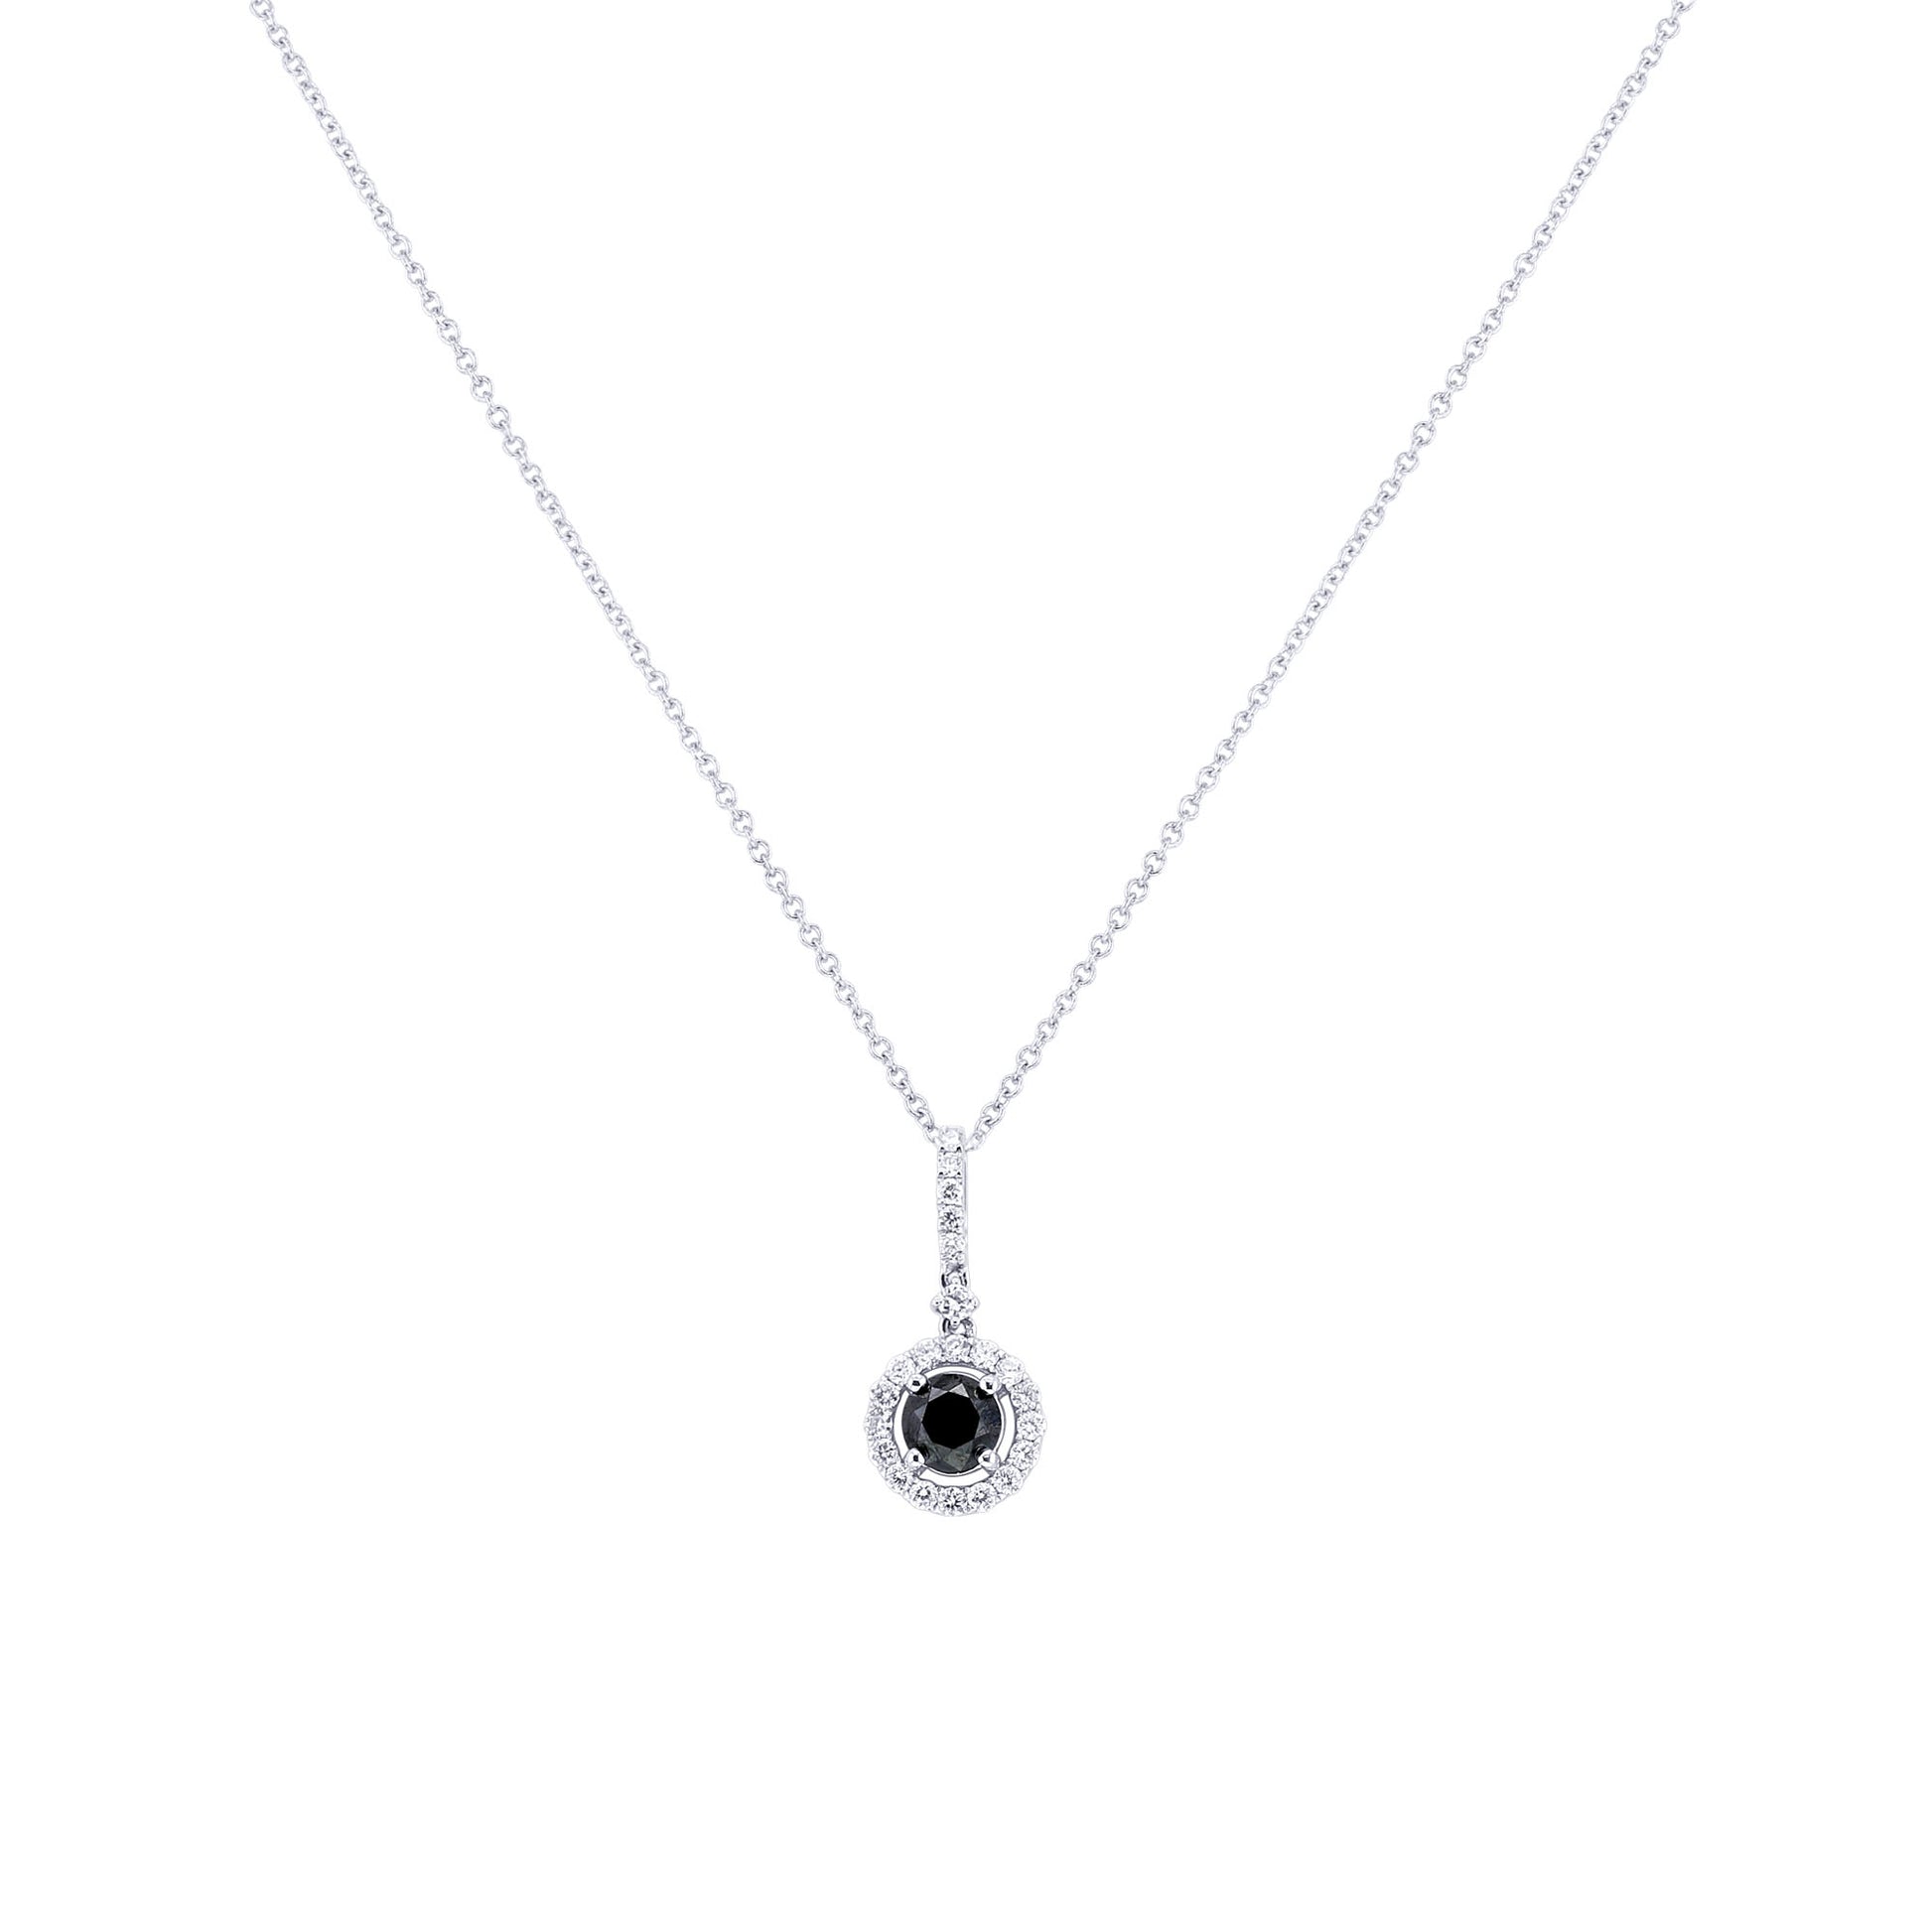 Enid Black and White Halo Diamond Necklace 1 3/8ct